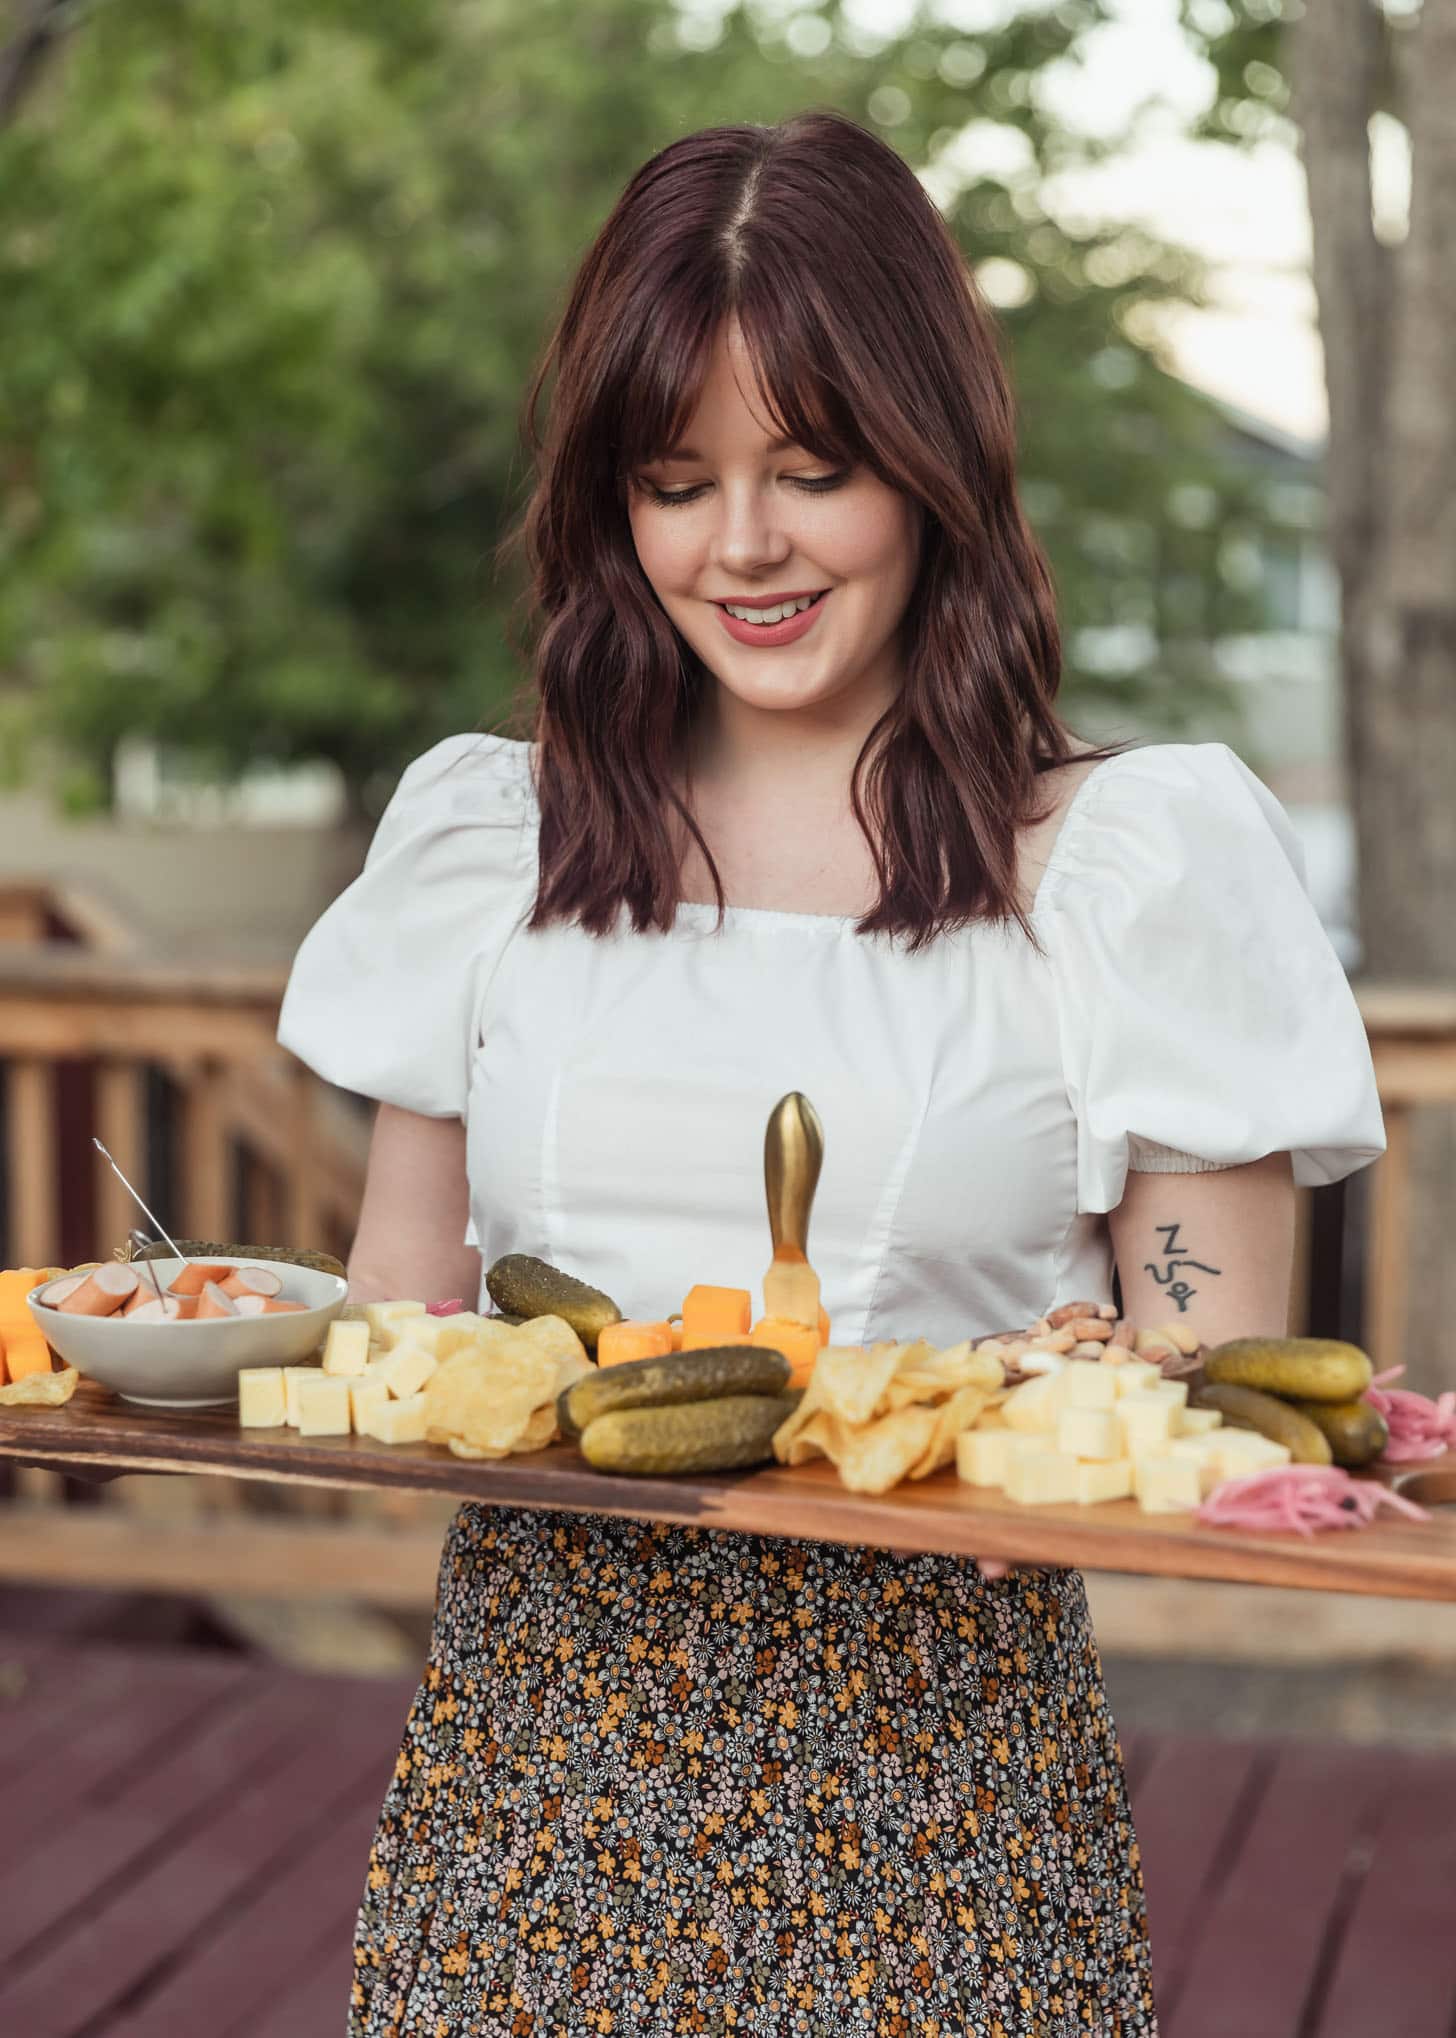 Unique Ideas for a Cocktail Party | A woman in a white shirt holding a charcuterie board outside.